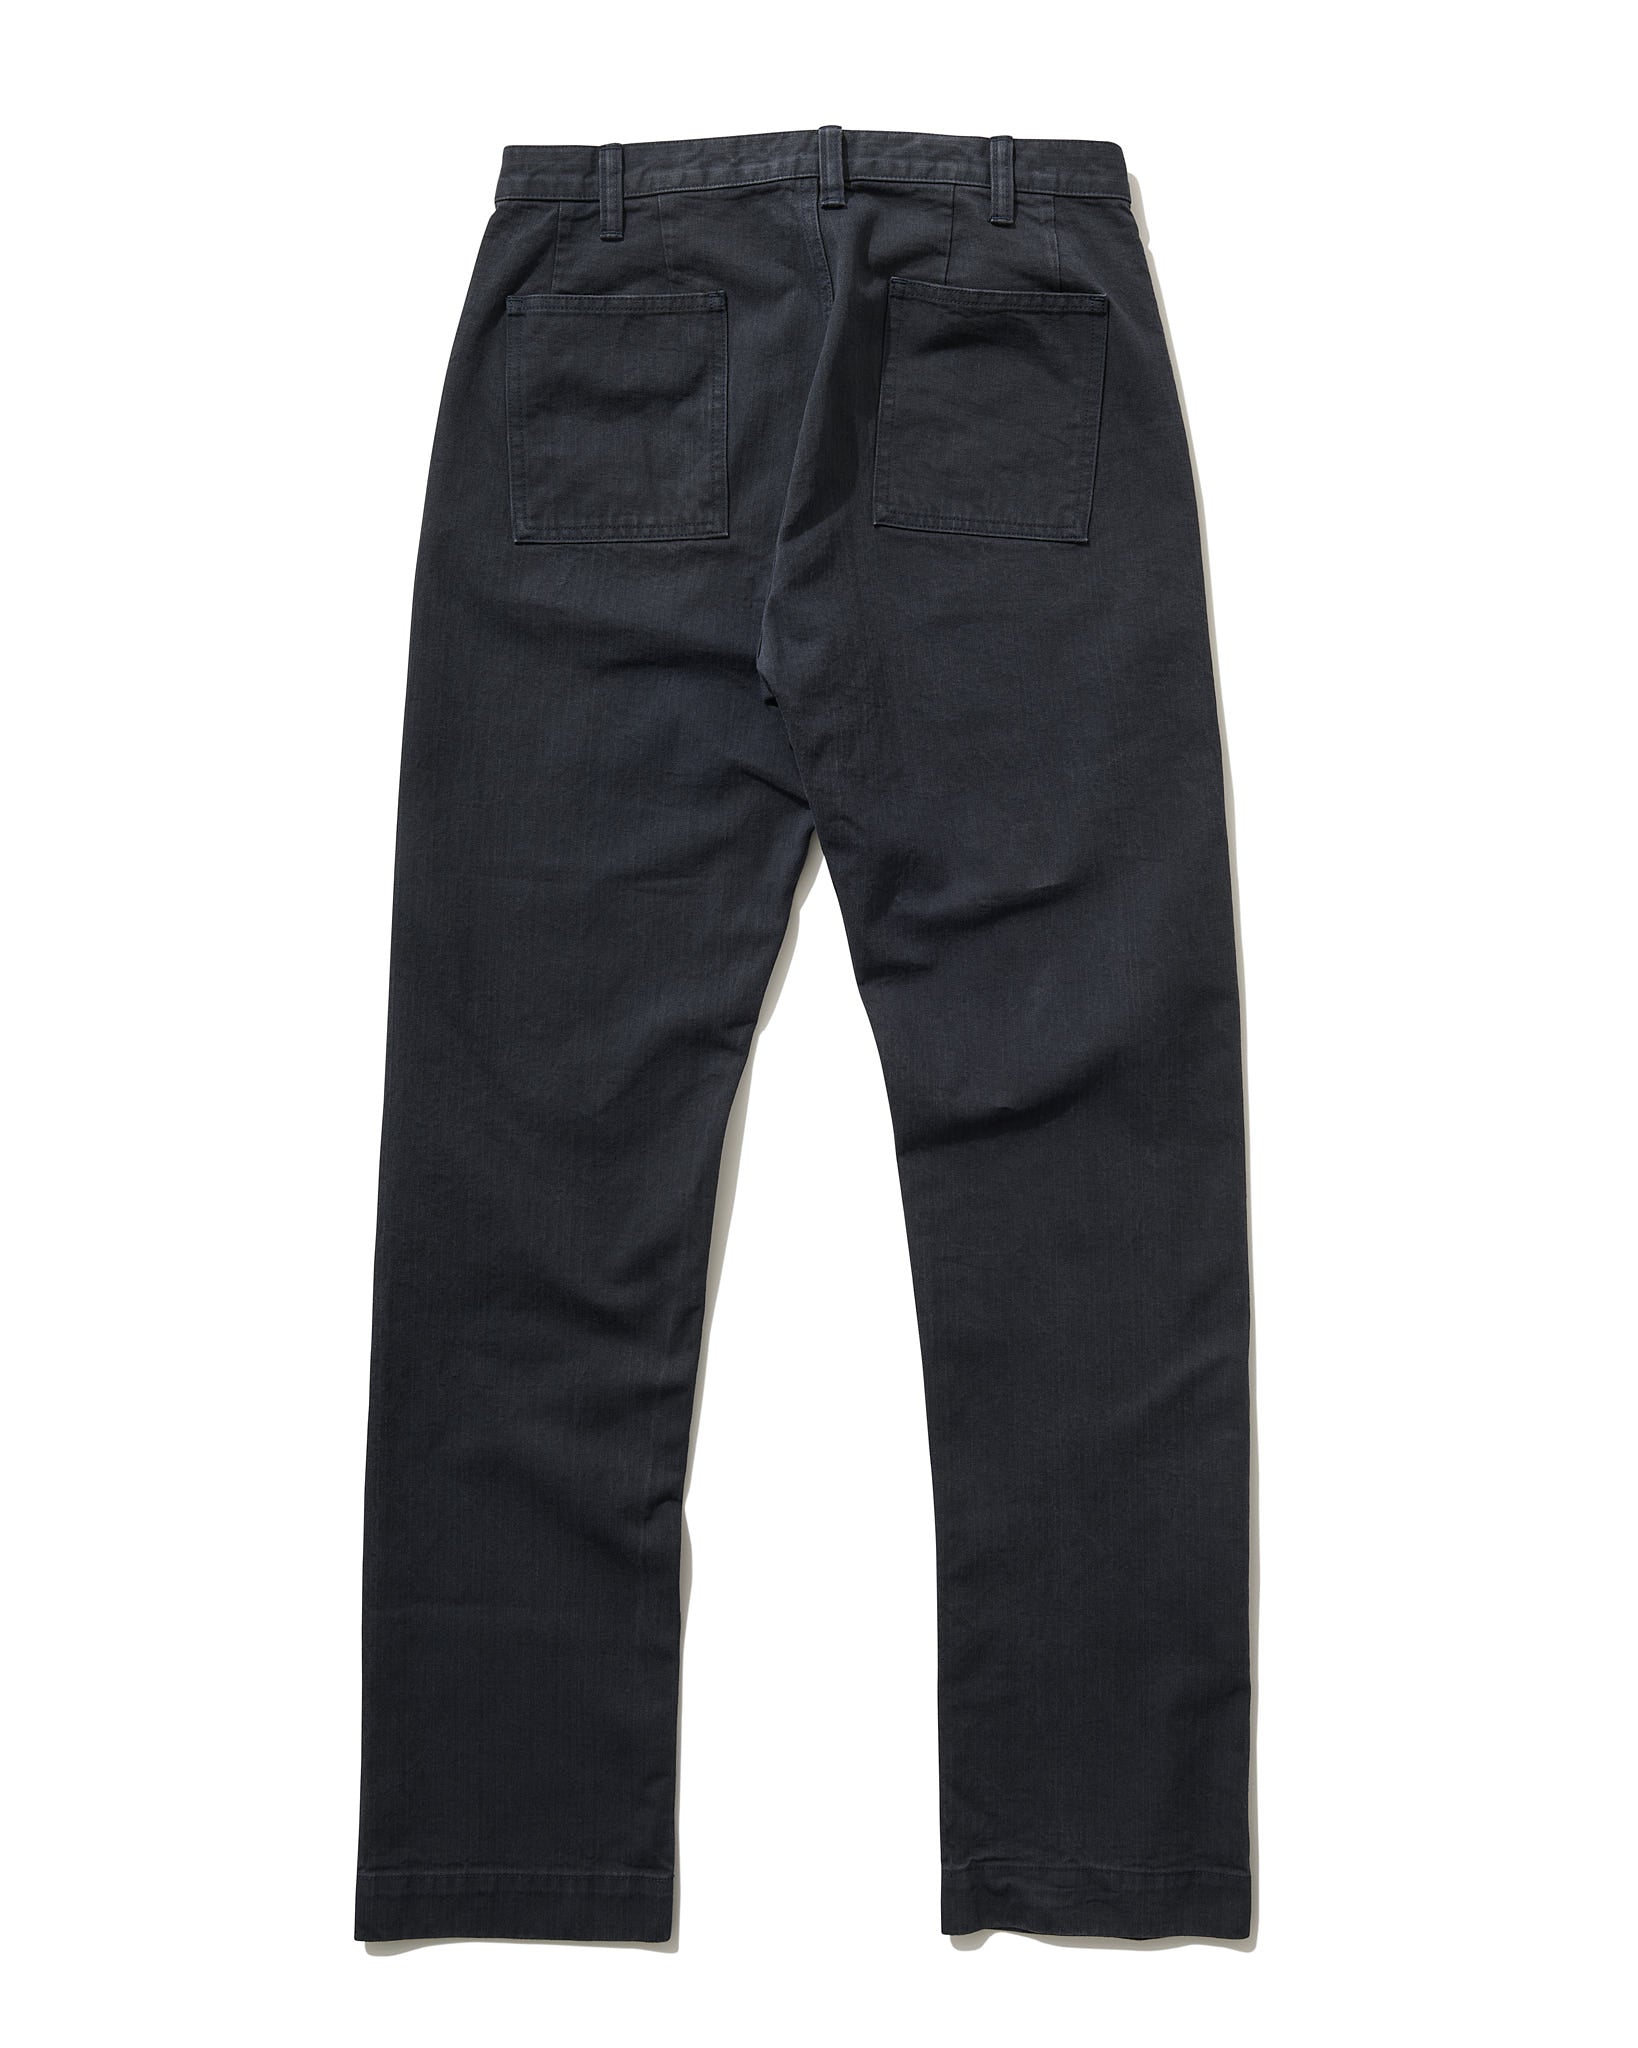 French Pocket Trouser in Navy HBT